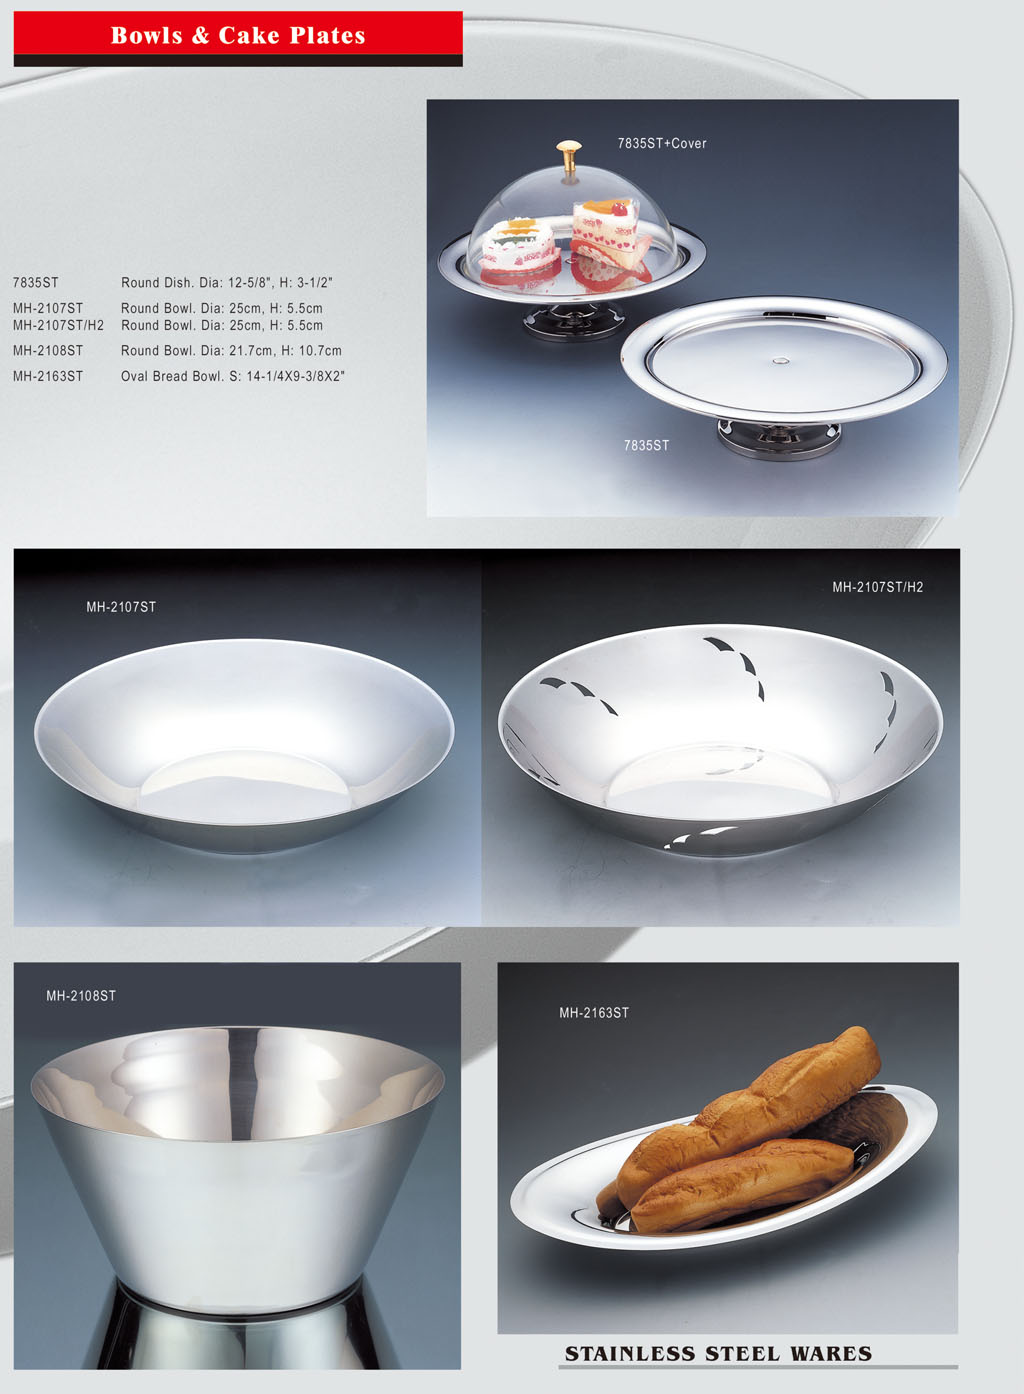 Stainless Steel Ware - Bowl & Cake Plates